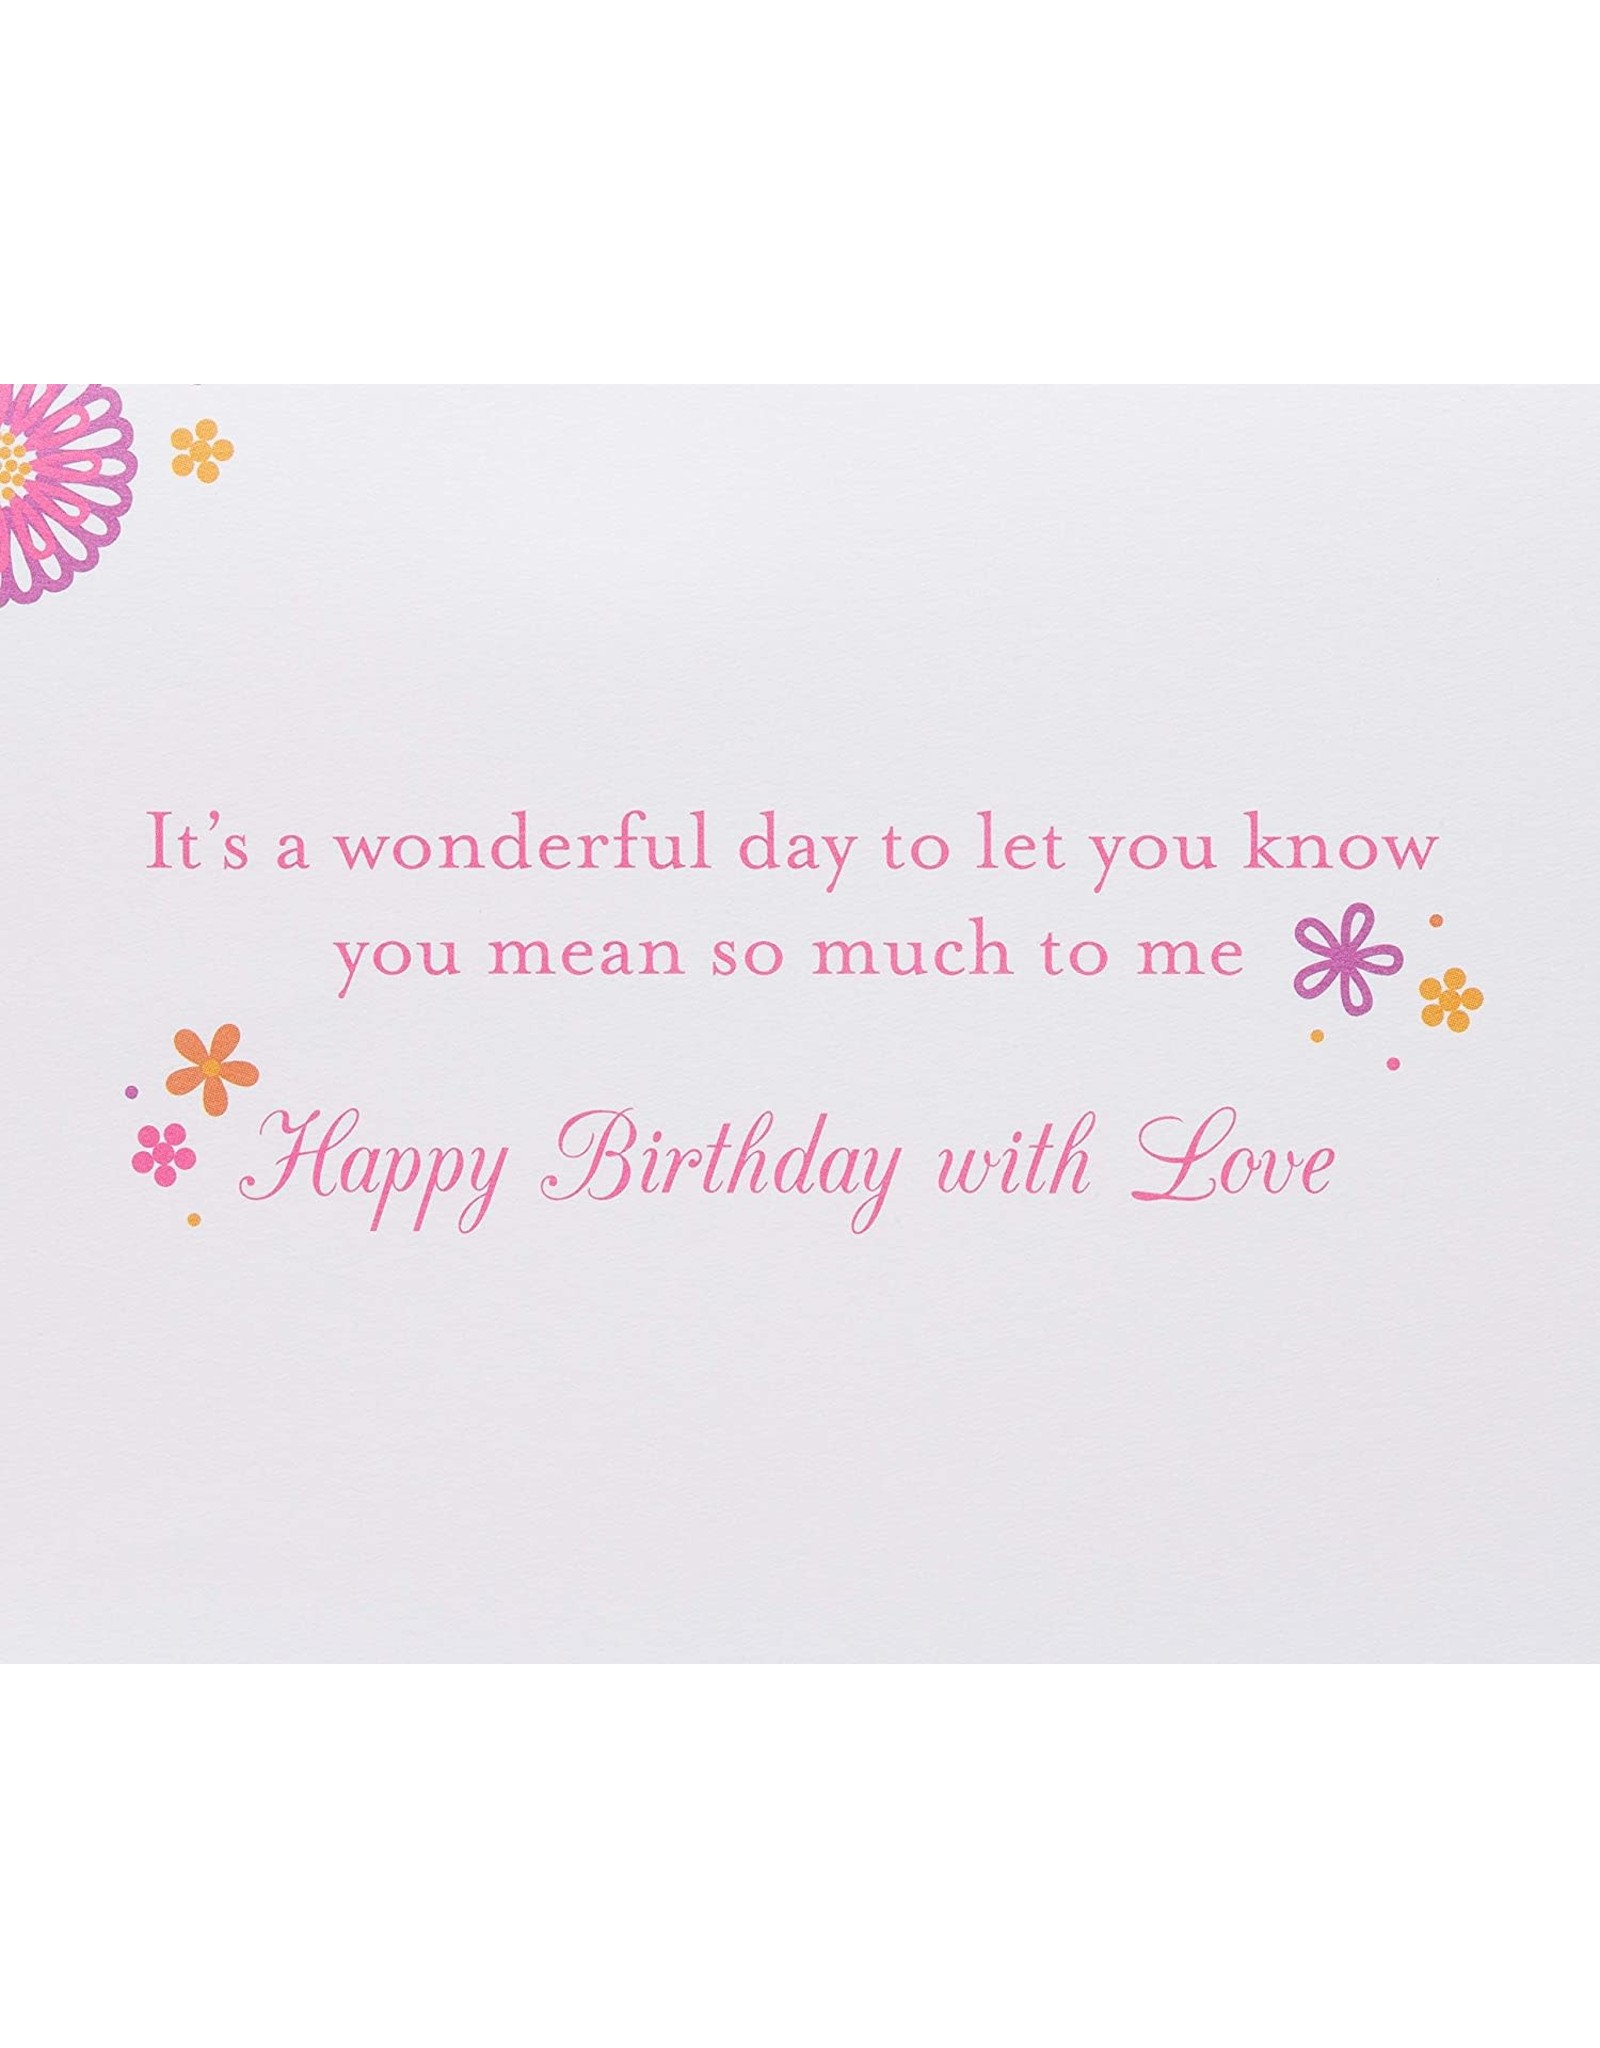 PAPYRUS® Birthday Card For Mom Embroidered With Flowers